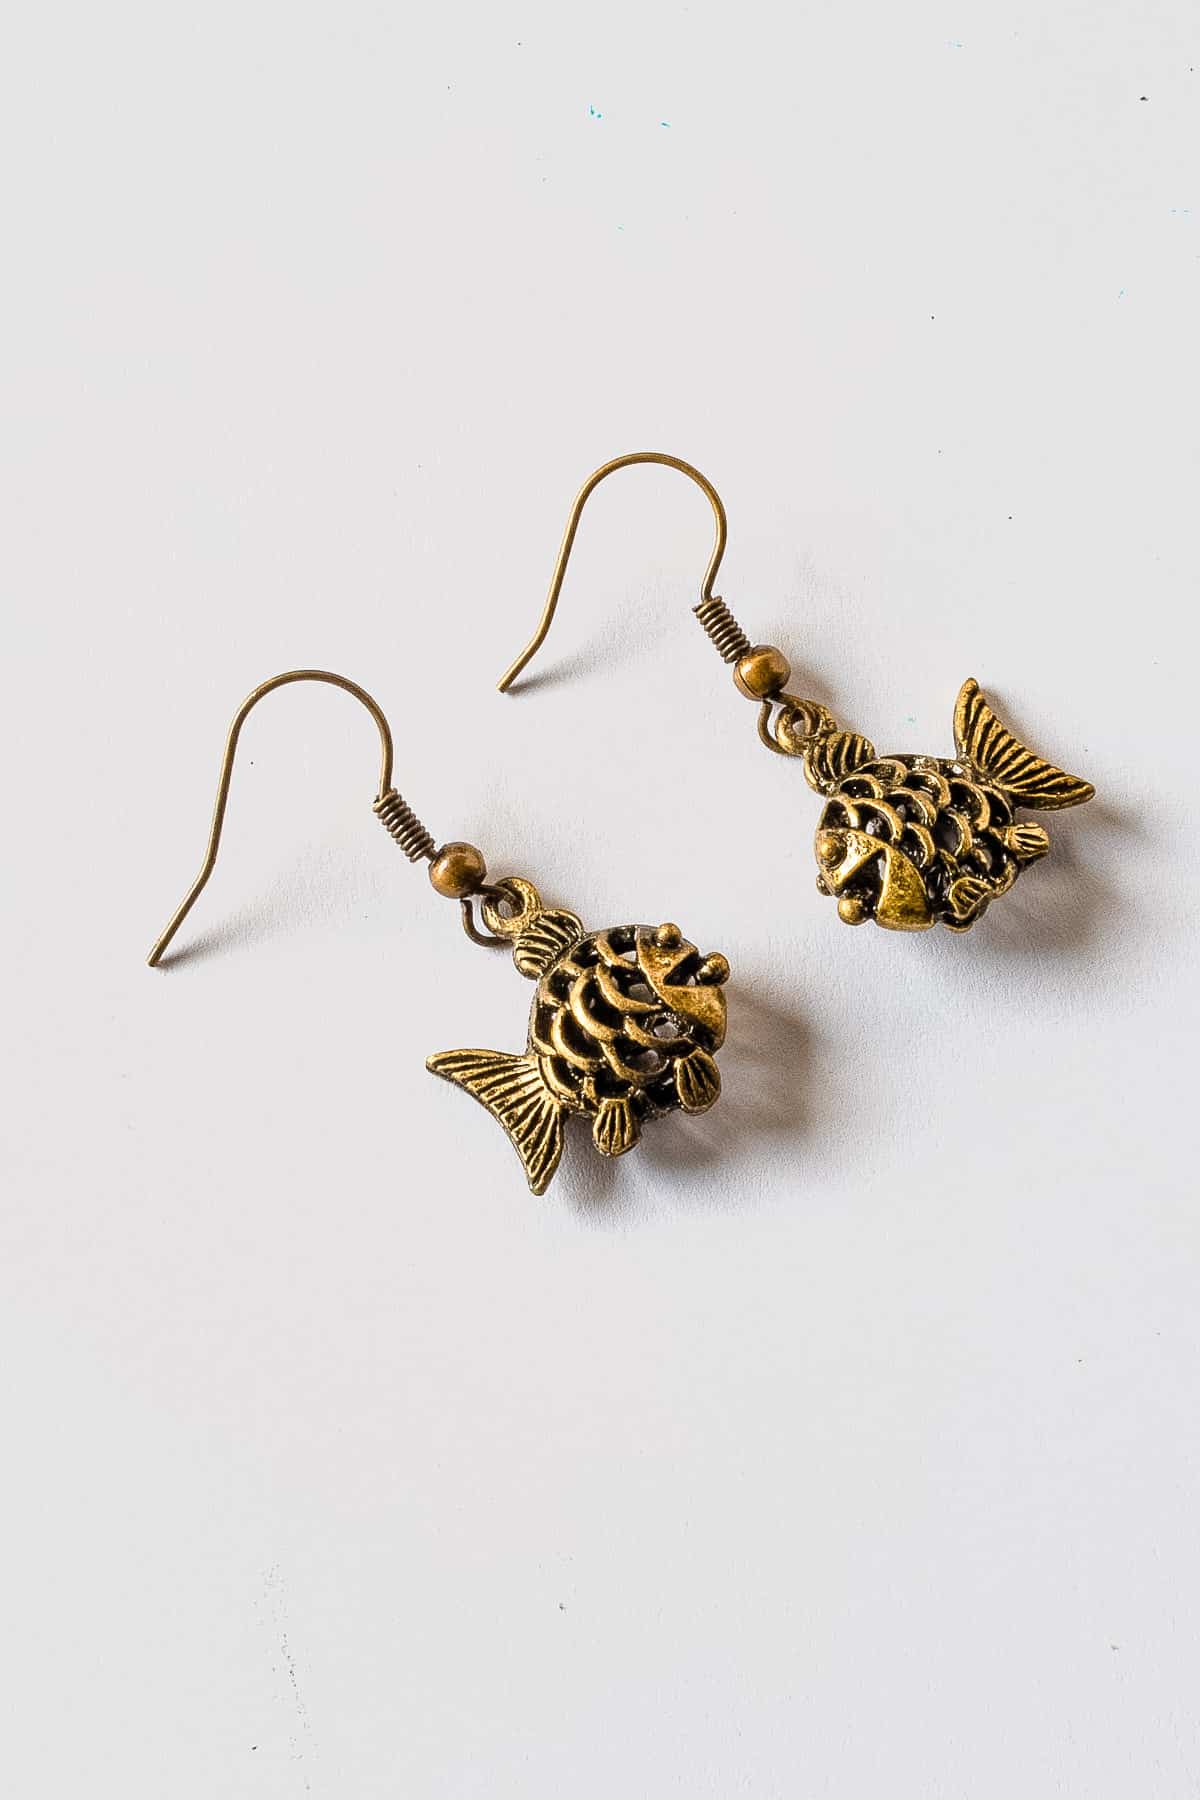 A pair of fish earrings with charms.